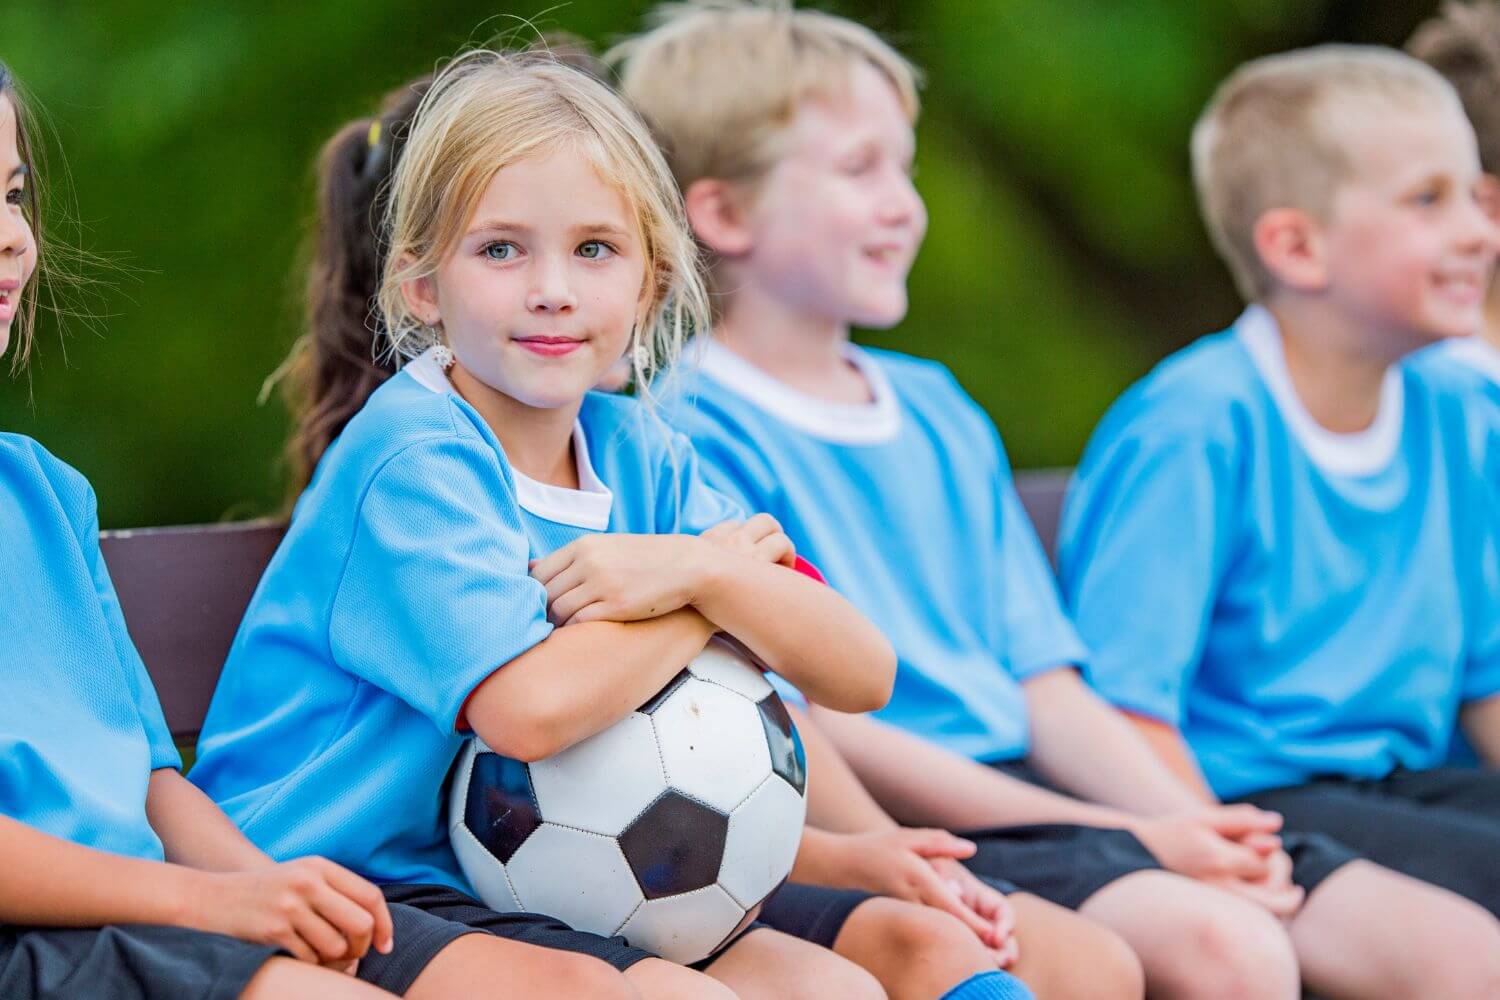 A team of youth coed soccer players in blue jerseys are sitting on a bench. A young girl is smiling while holding onto a soccer ball